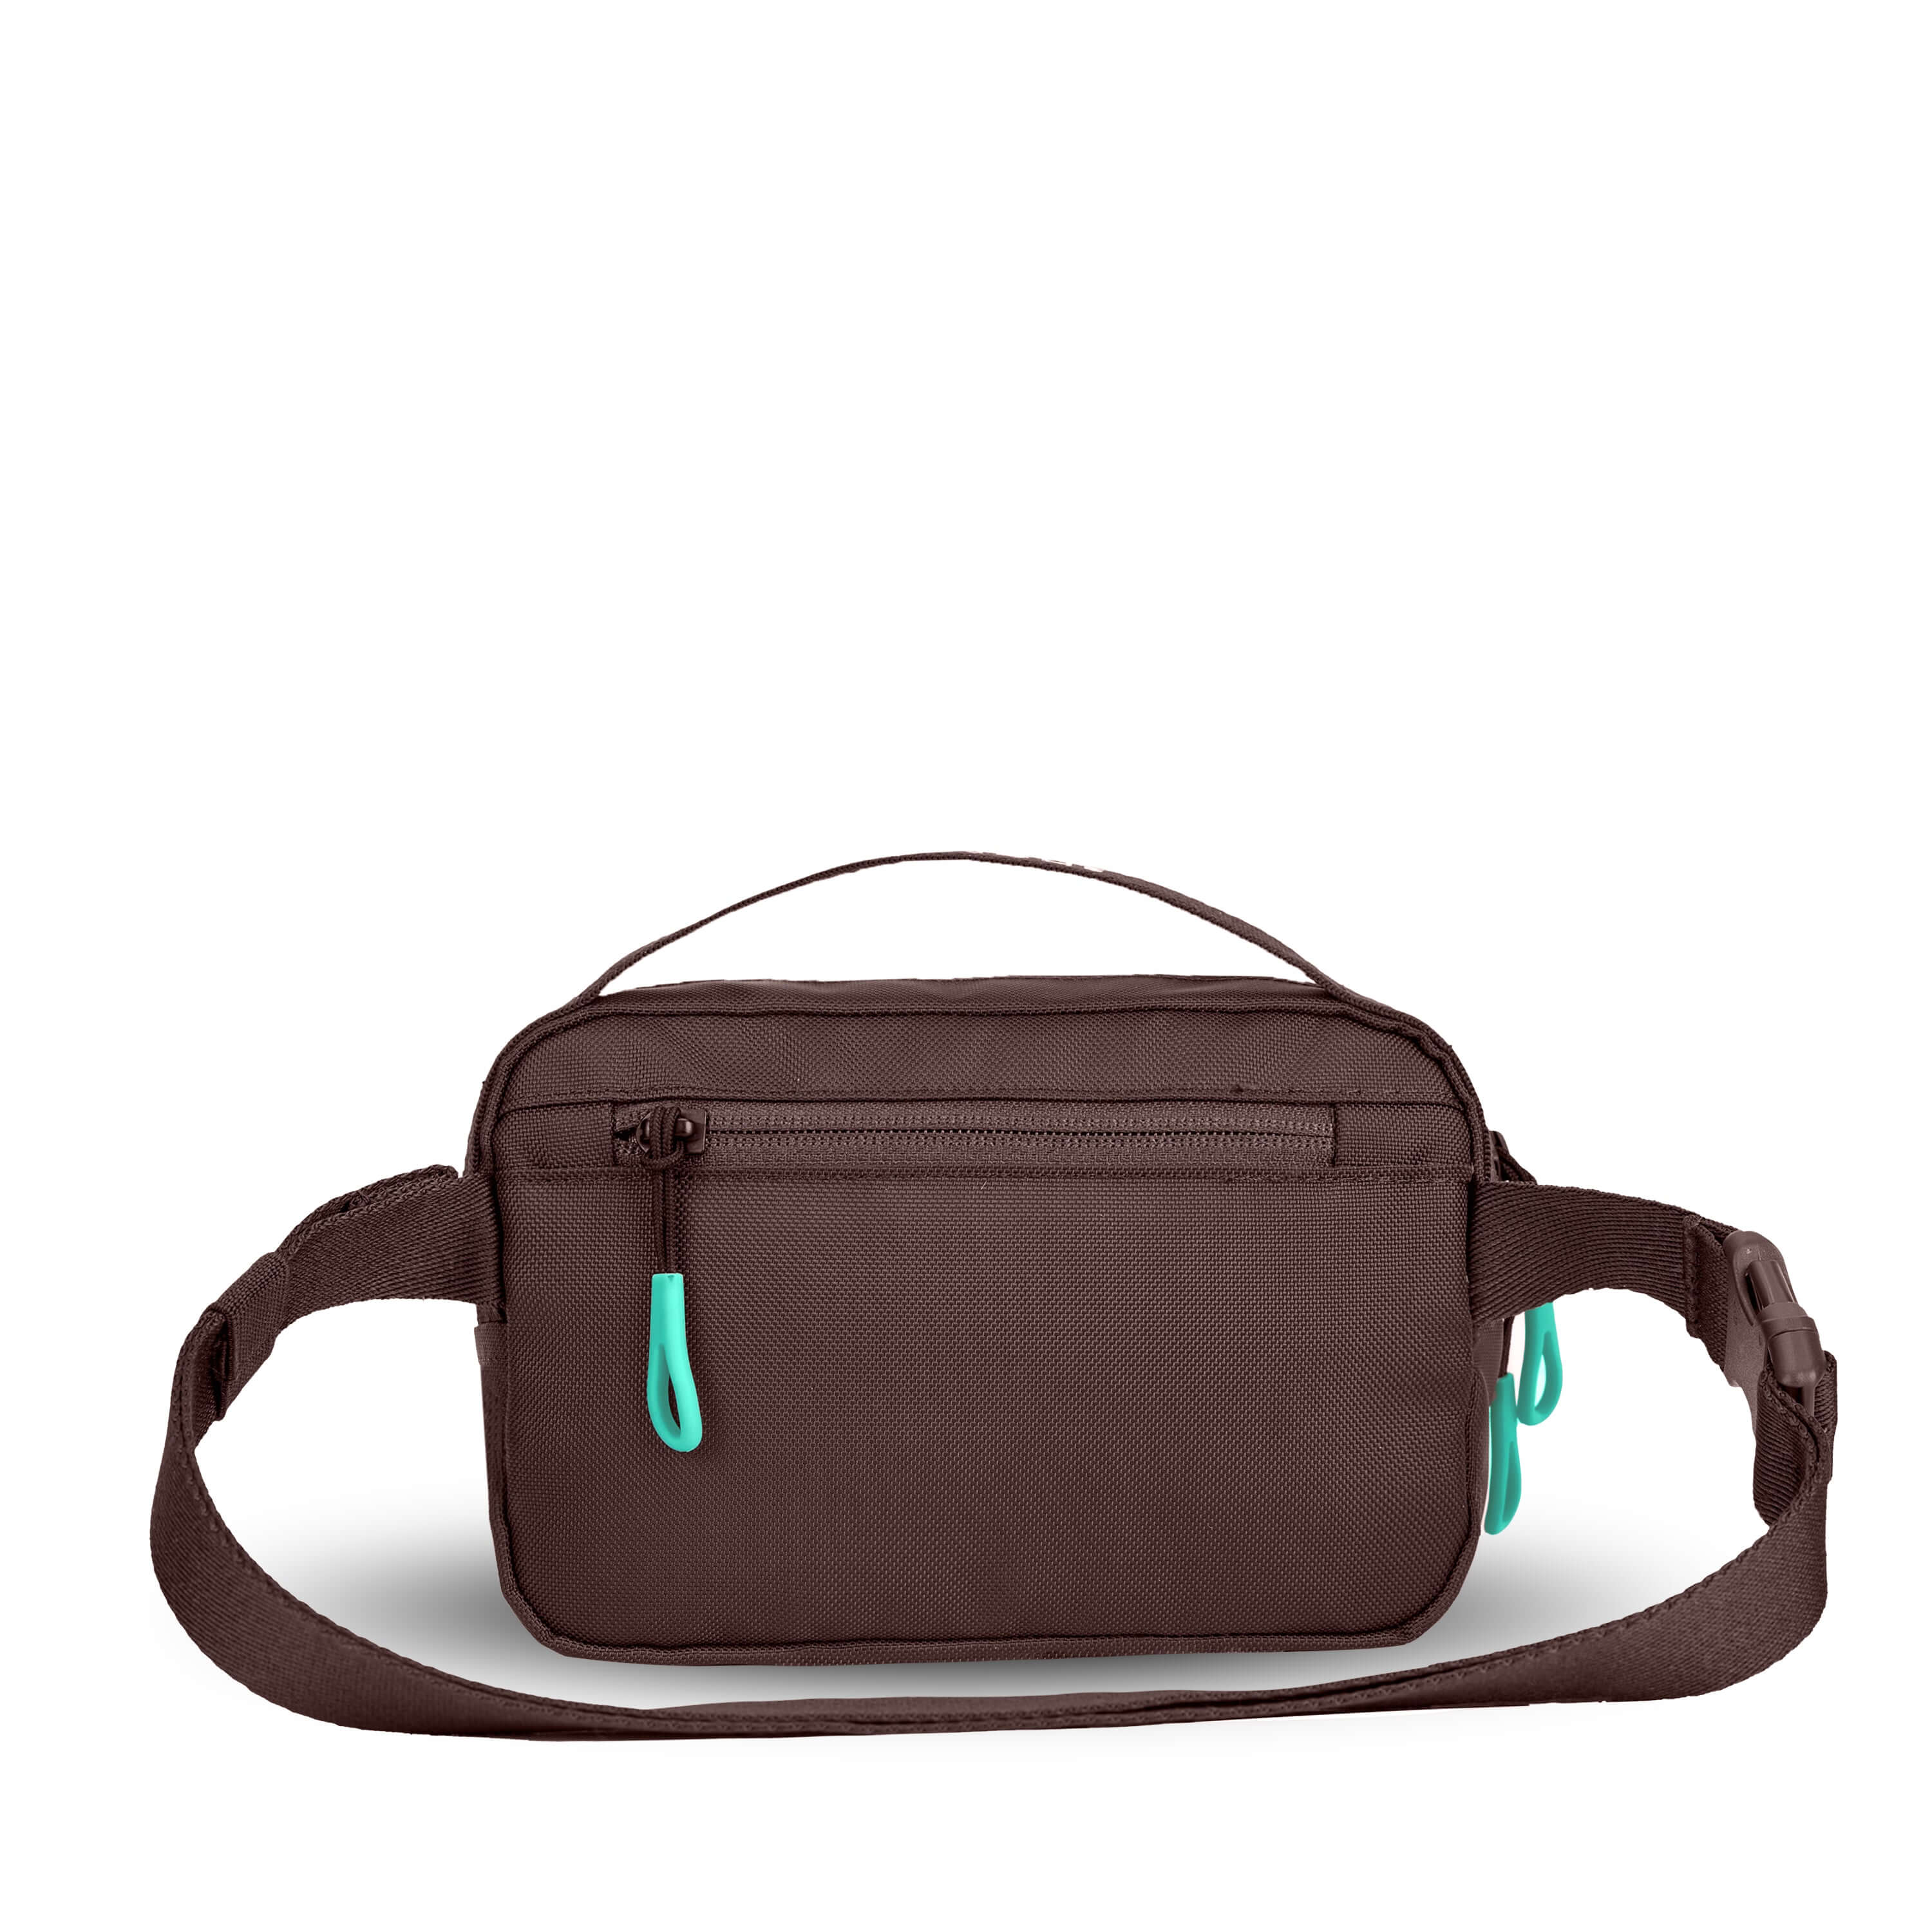 Back view of Sherpani&#39;s fanny pack, the Hyk in Seagreen. The back of the bag is brown. Easy-pull zippers are accented in light green. The fanny pack features an adjustable strap with a buckle.